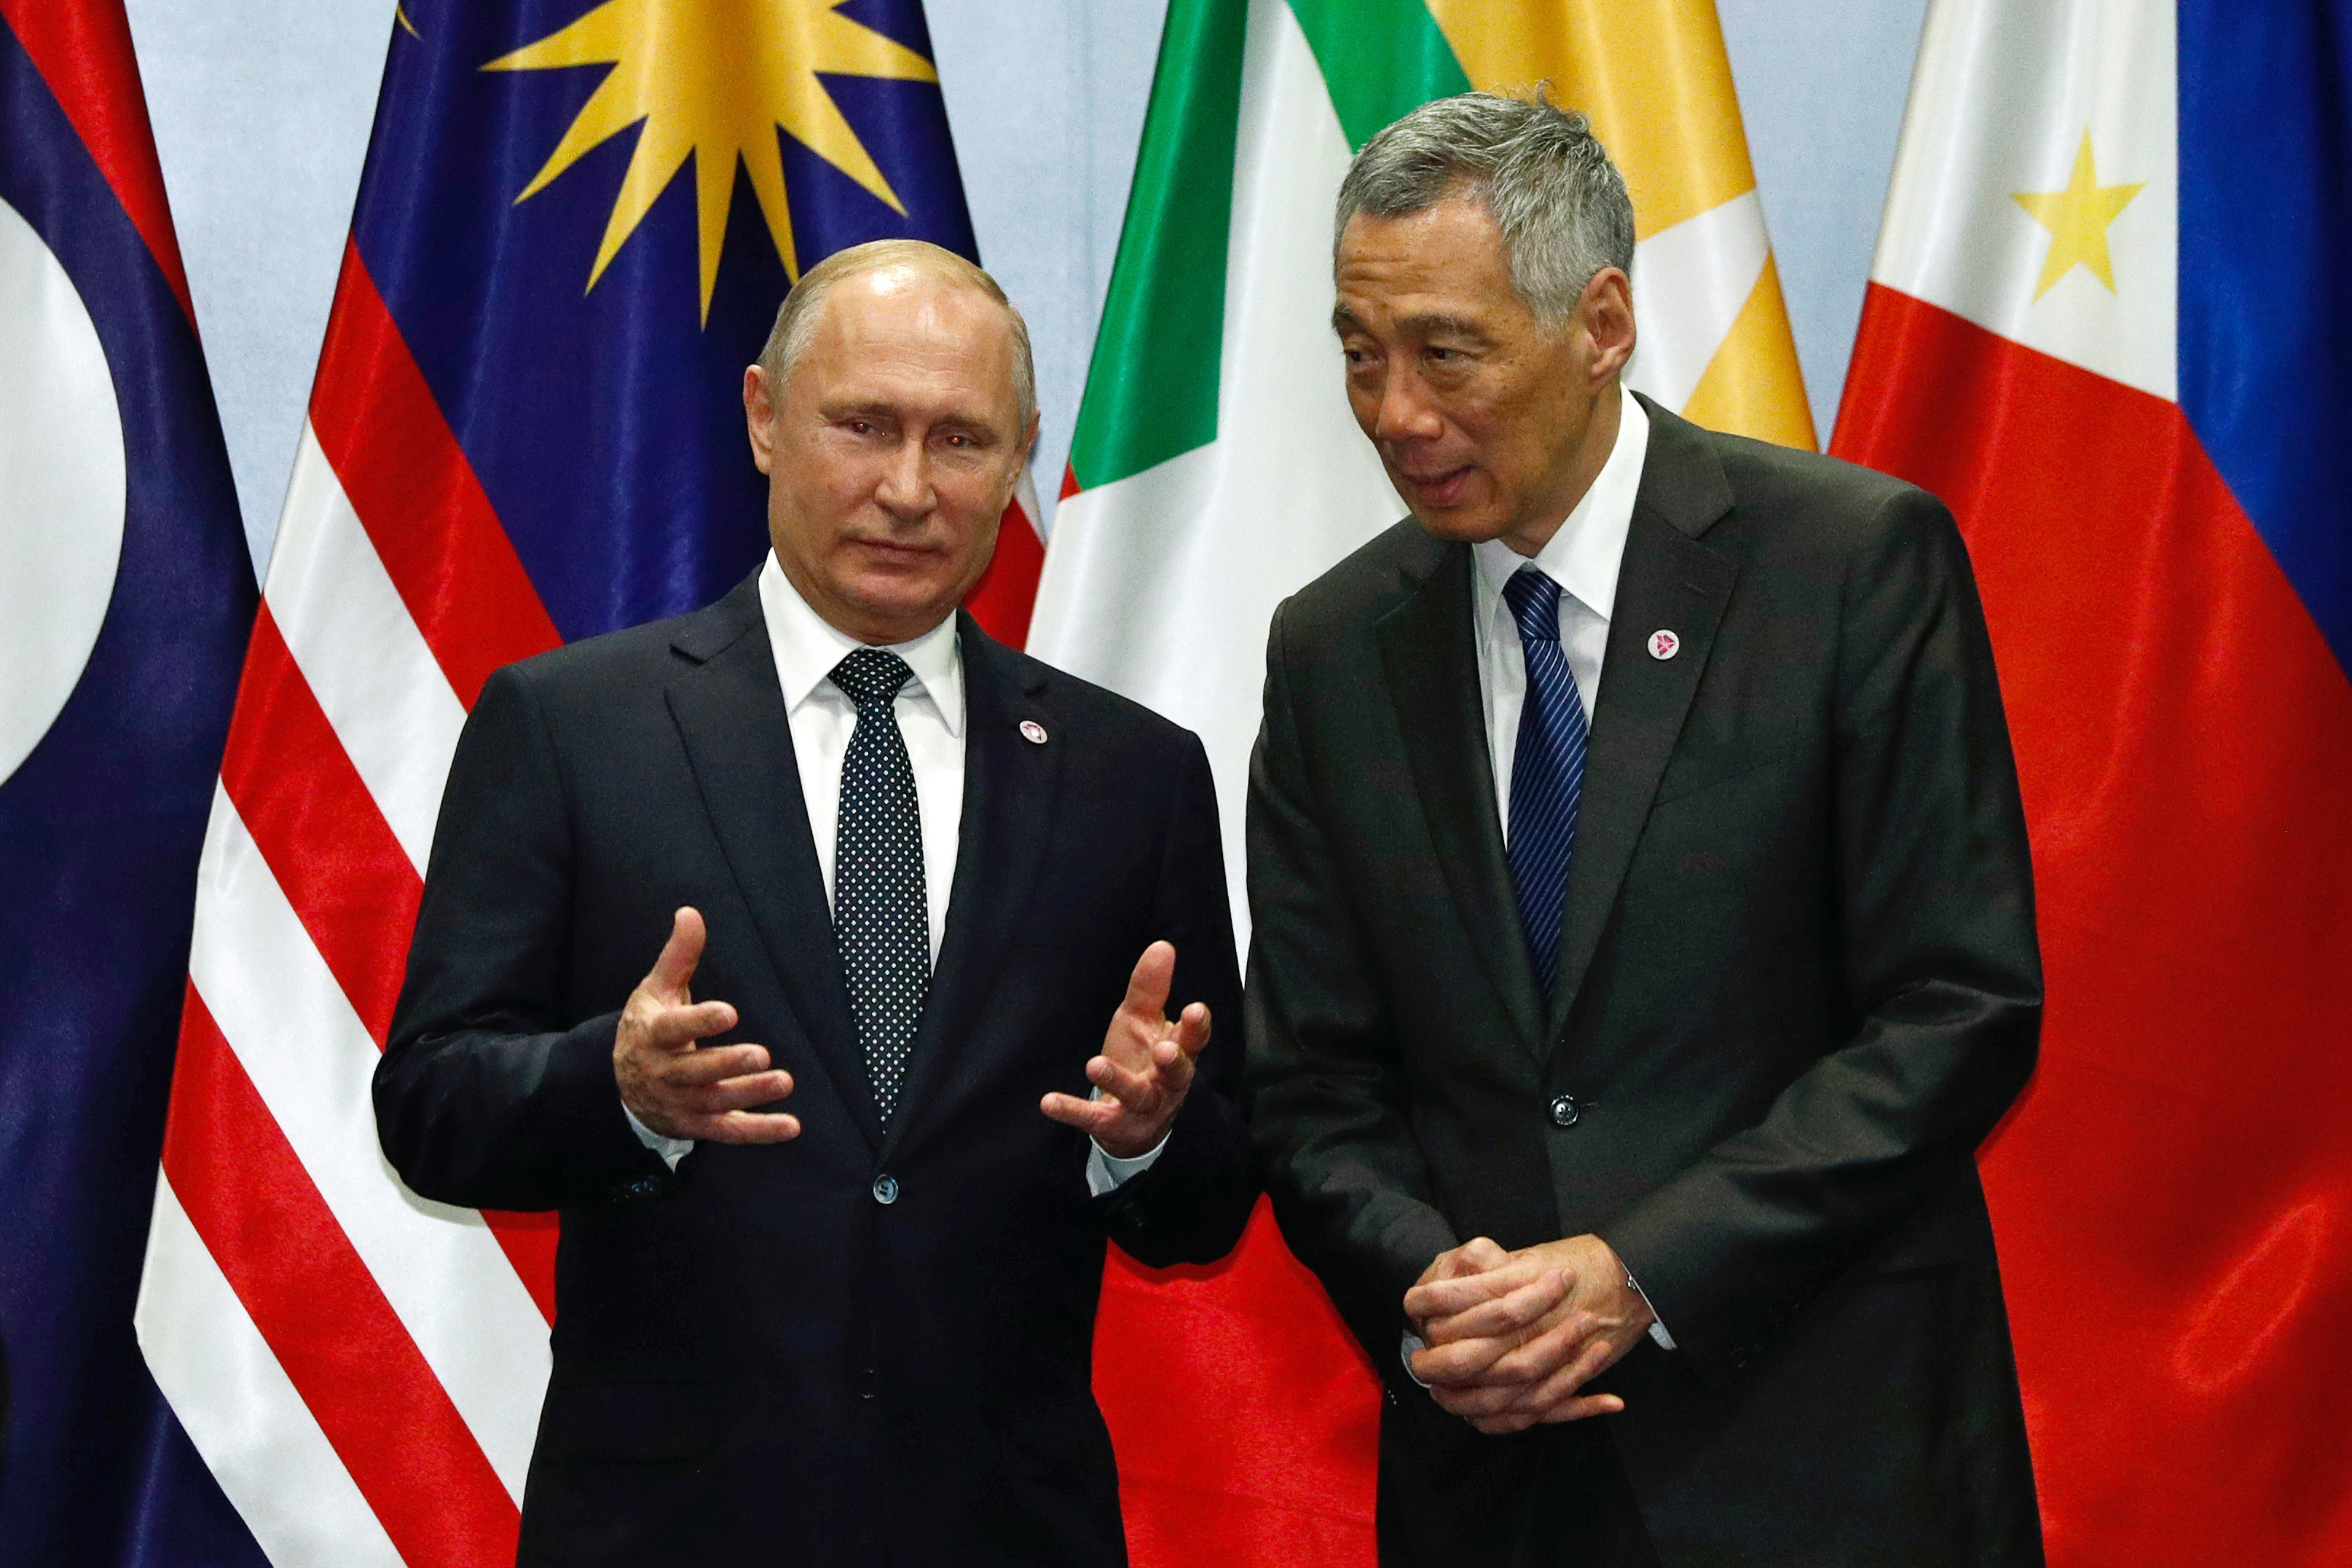 Russian President Vladimir Putin speaks with Singapore's Prime Minister Lee Hsien Loong during a group photo at the ASEAN-Russia Summit in Singapore